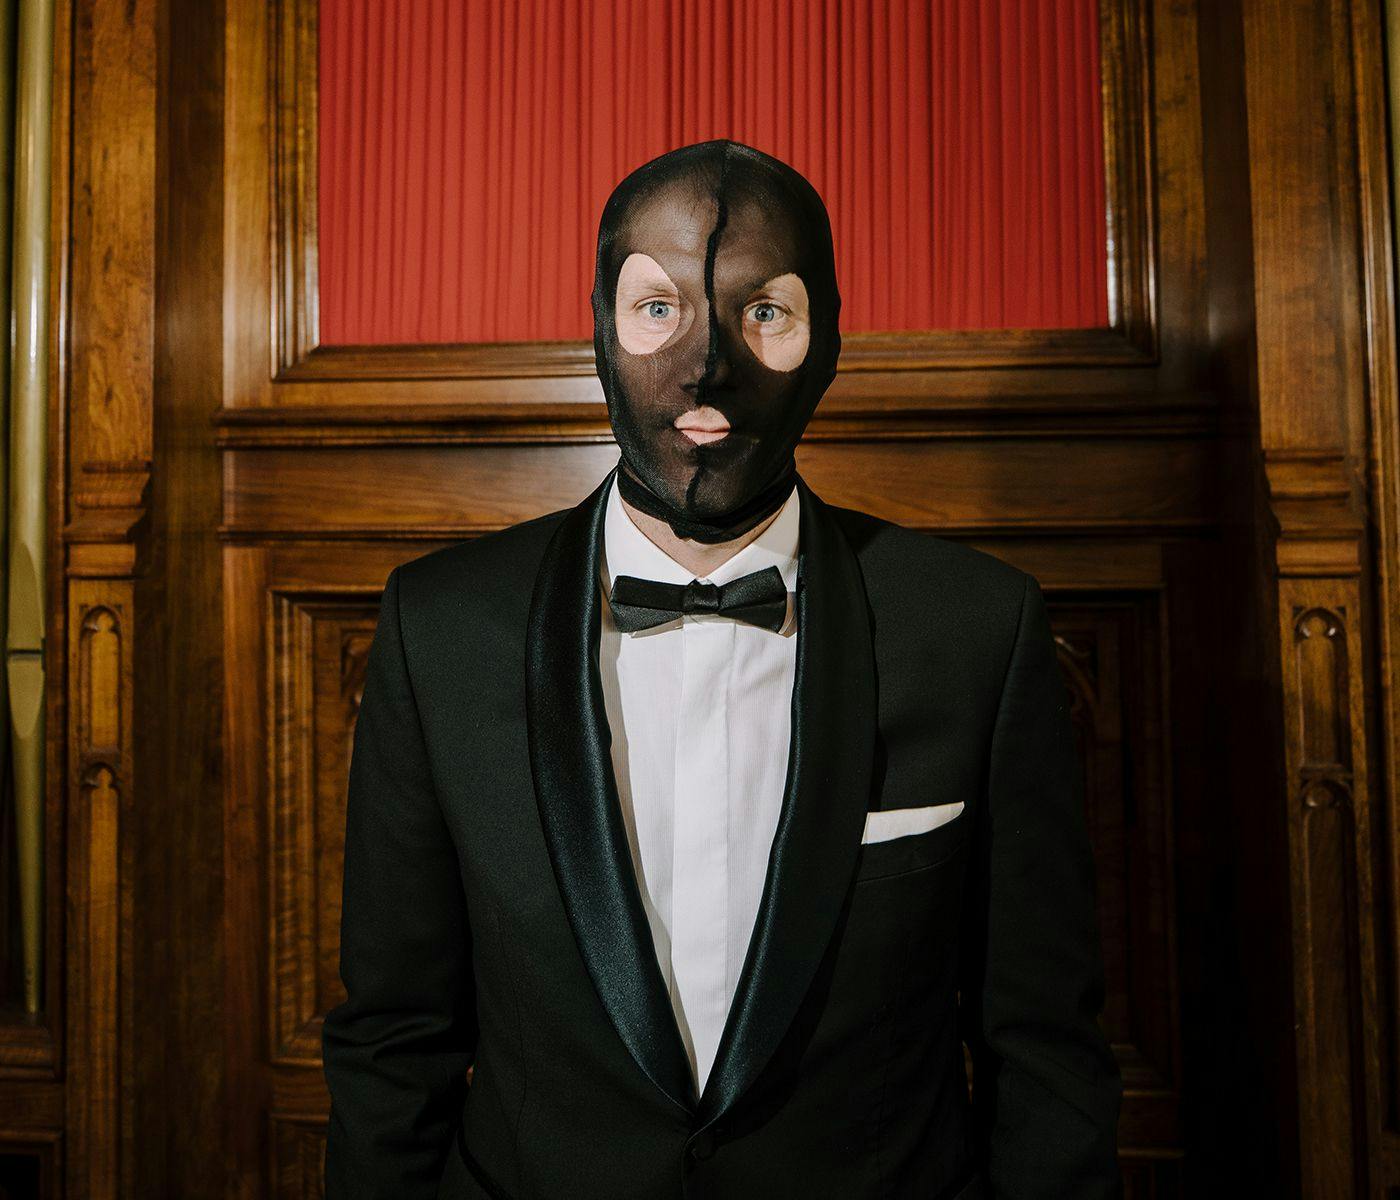 A person wearing a black tuxedo and bow tie. Their face is covered with a ski-mask style stocking.